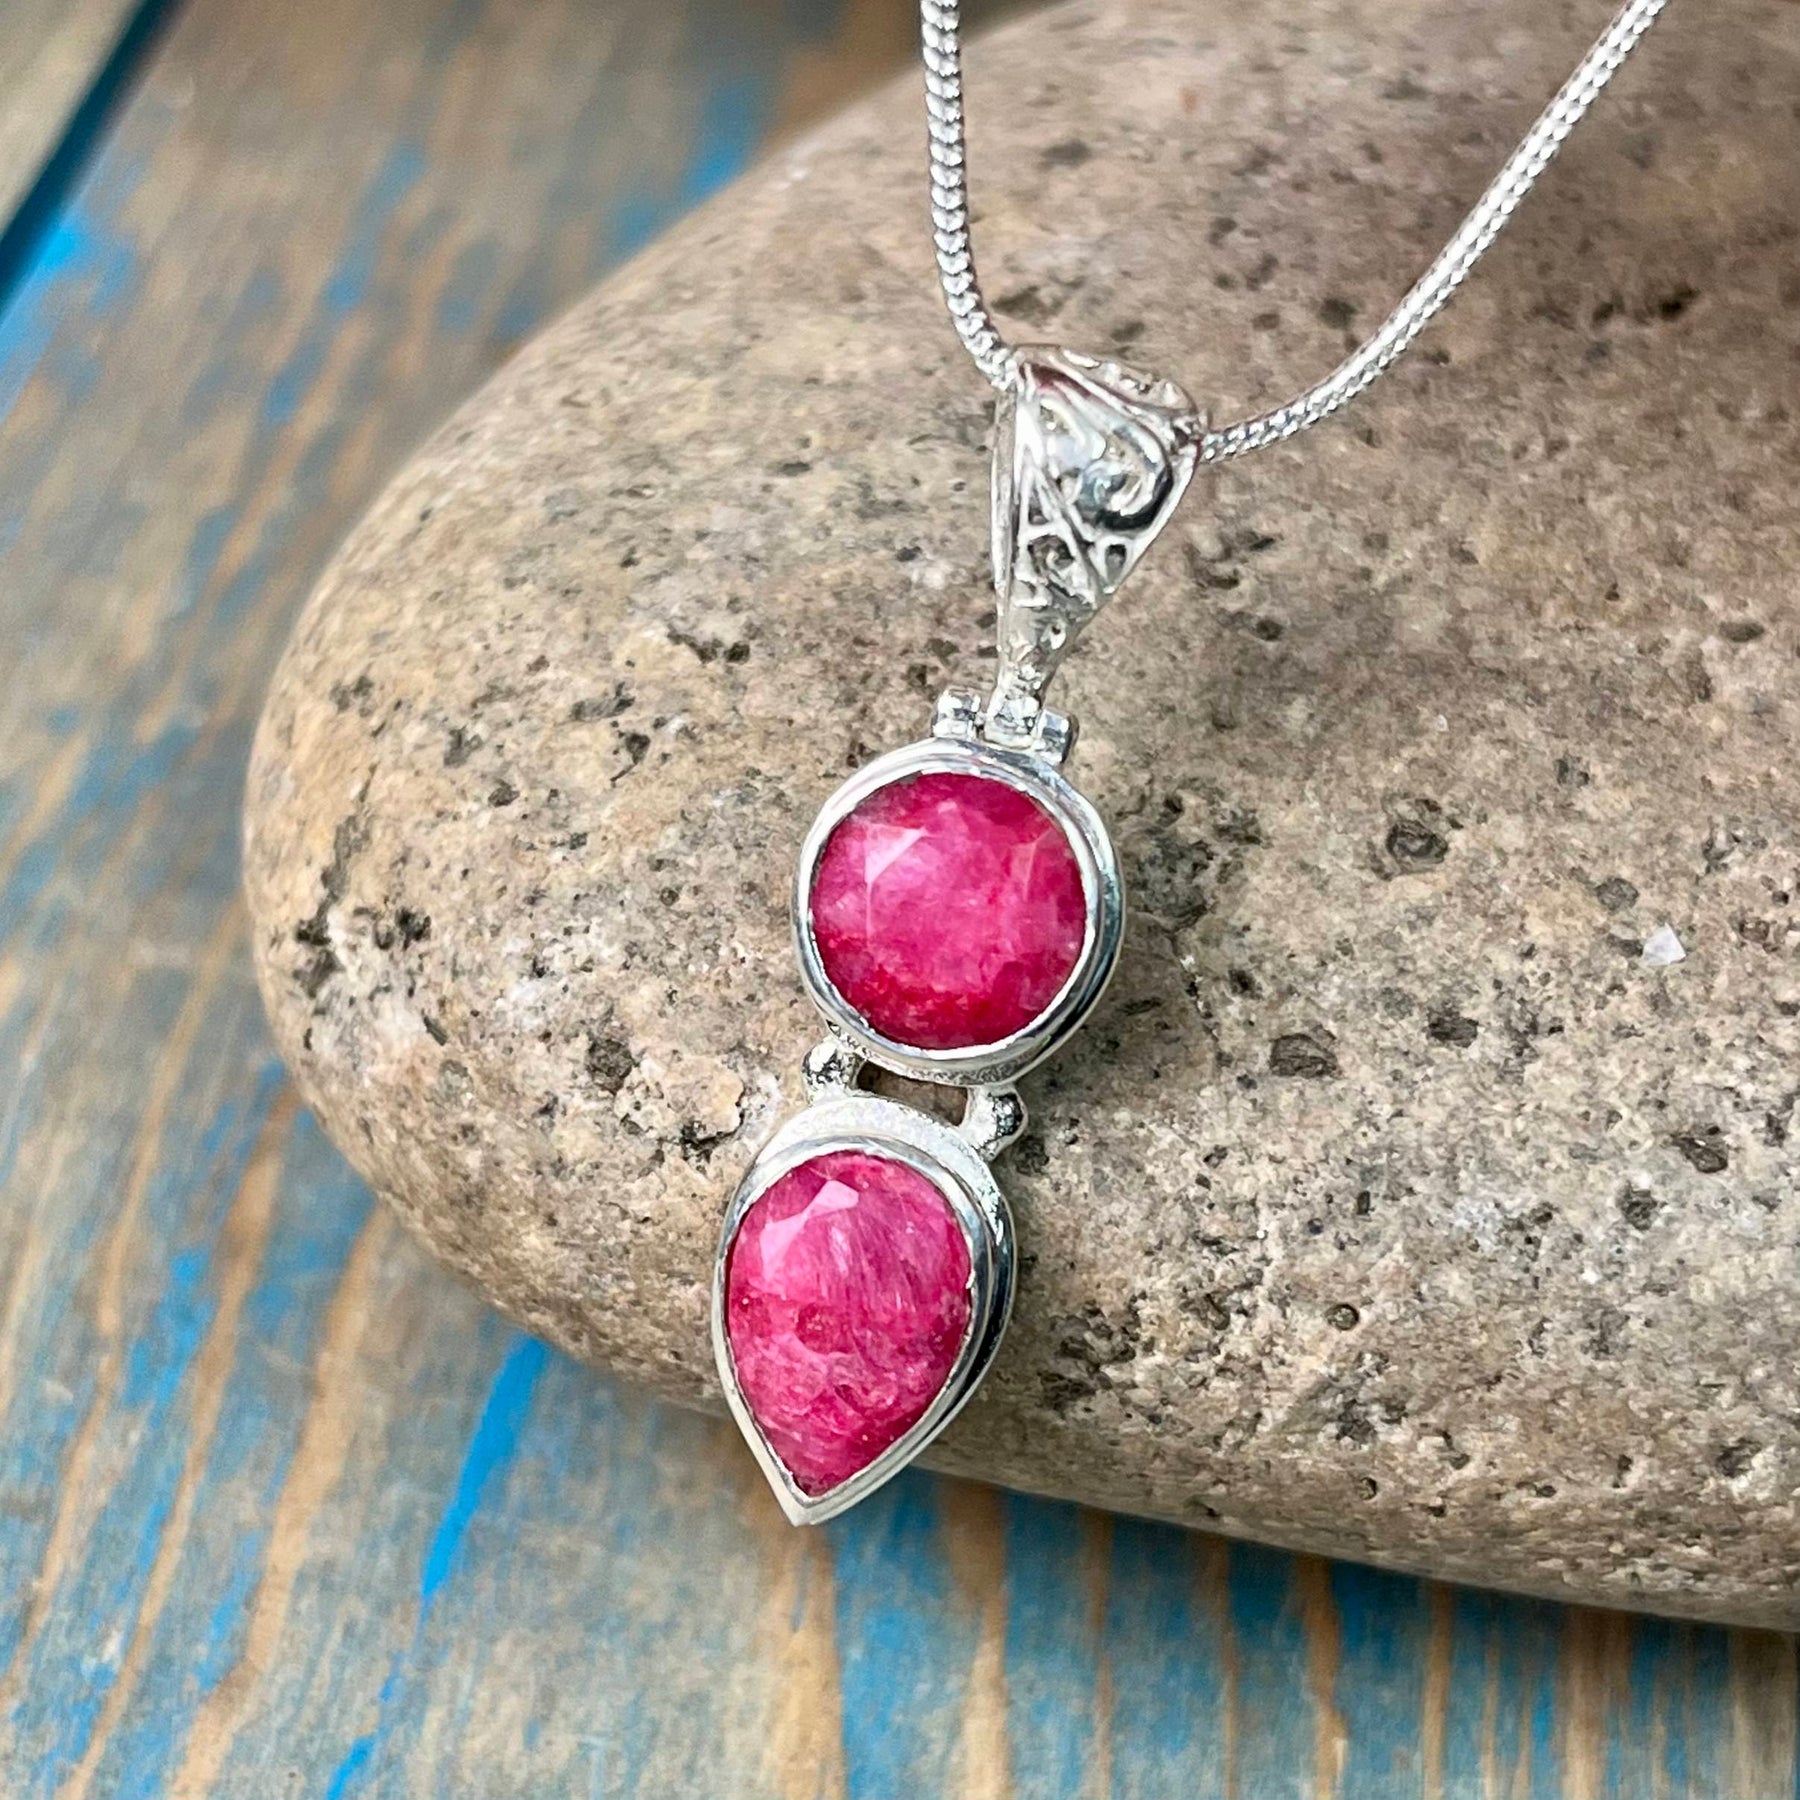 Ruby pendant necklace